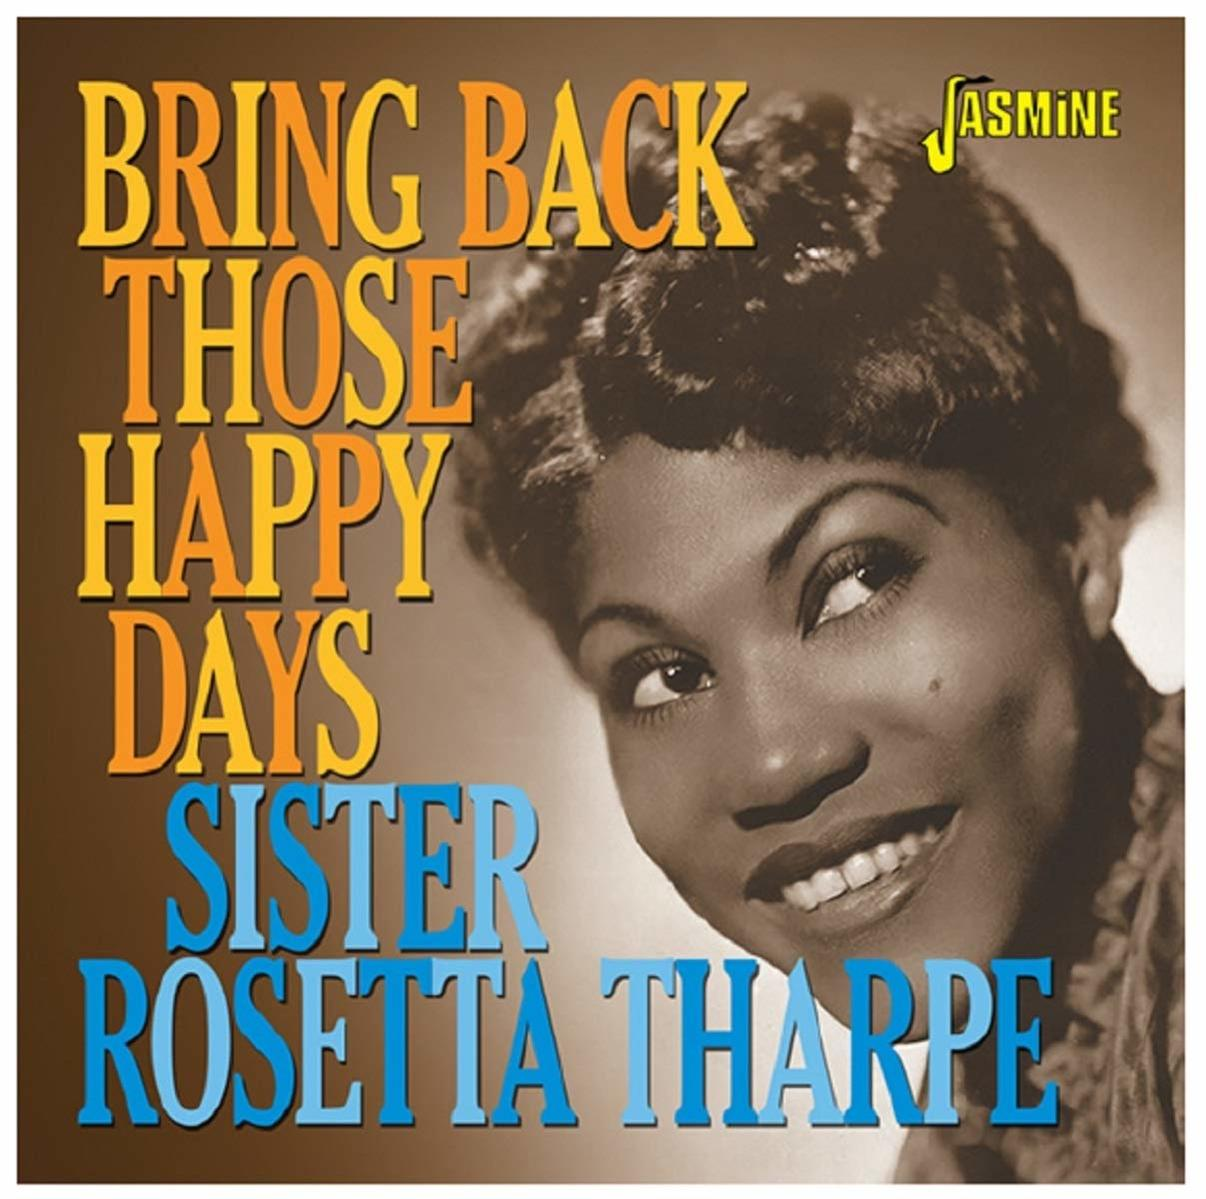 Sister Rosetta Tharpe BRING AND HAPPY DAYS. GREATEST HITS - (CD) SEL BACK THOSE 